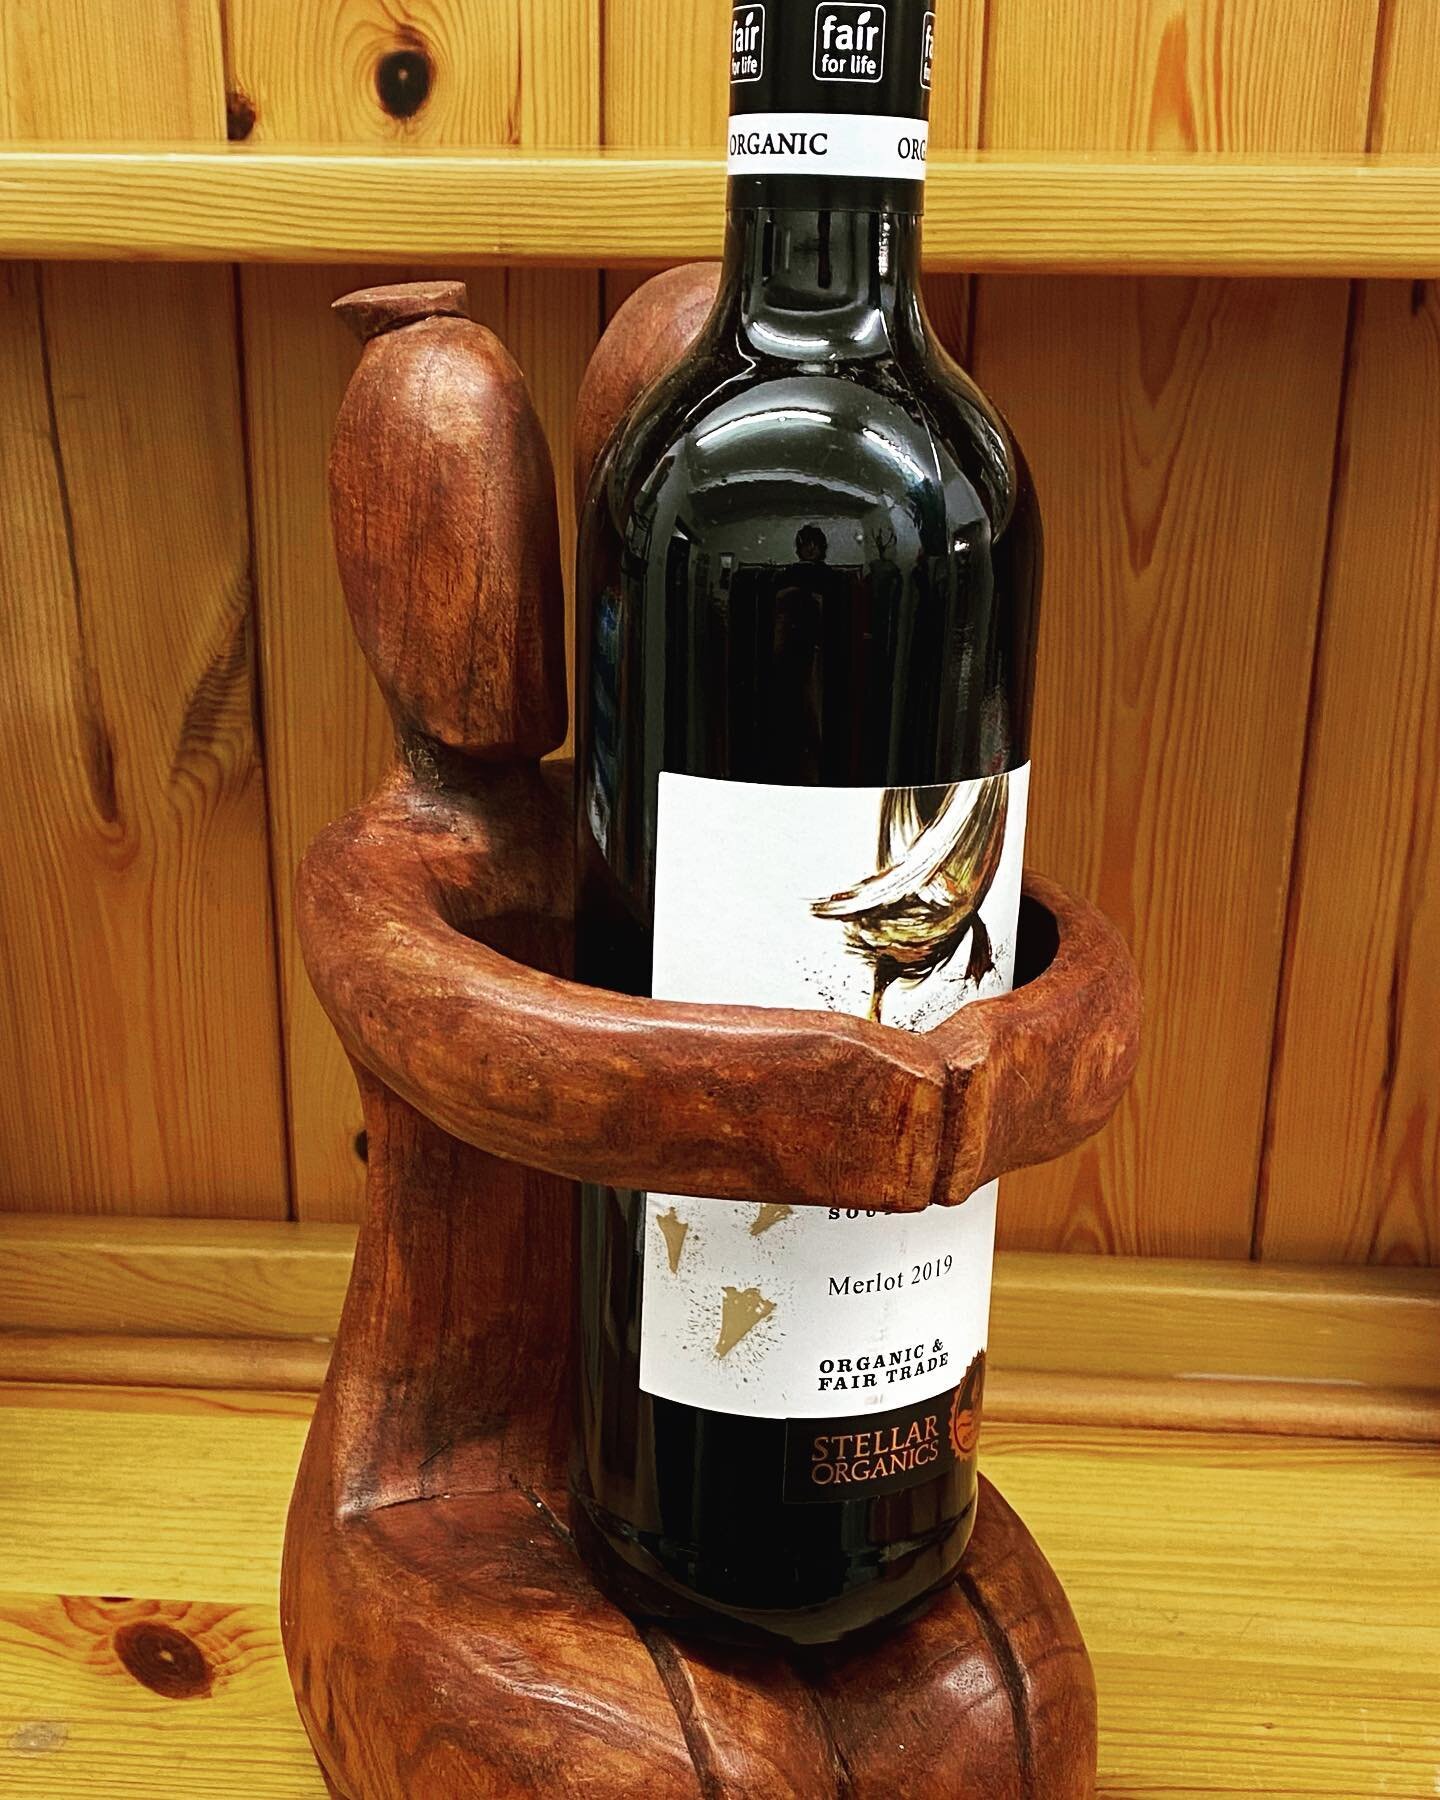 A hand carved sustainable wood wine bottle holder, a real talking point. Wine not included, but do see our range of fairtrade wines too! #handcarved  #sustainablewood #winebottleholder #fairtradewine